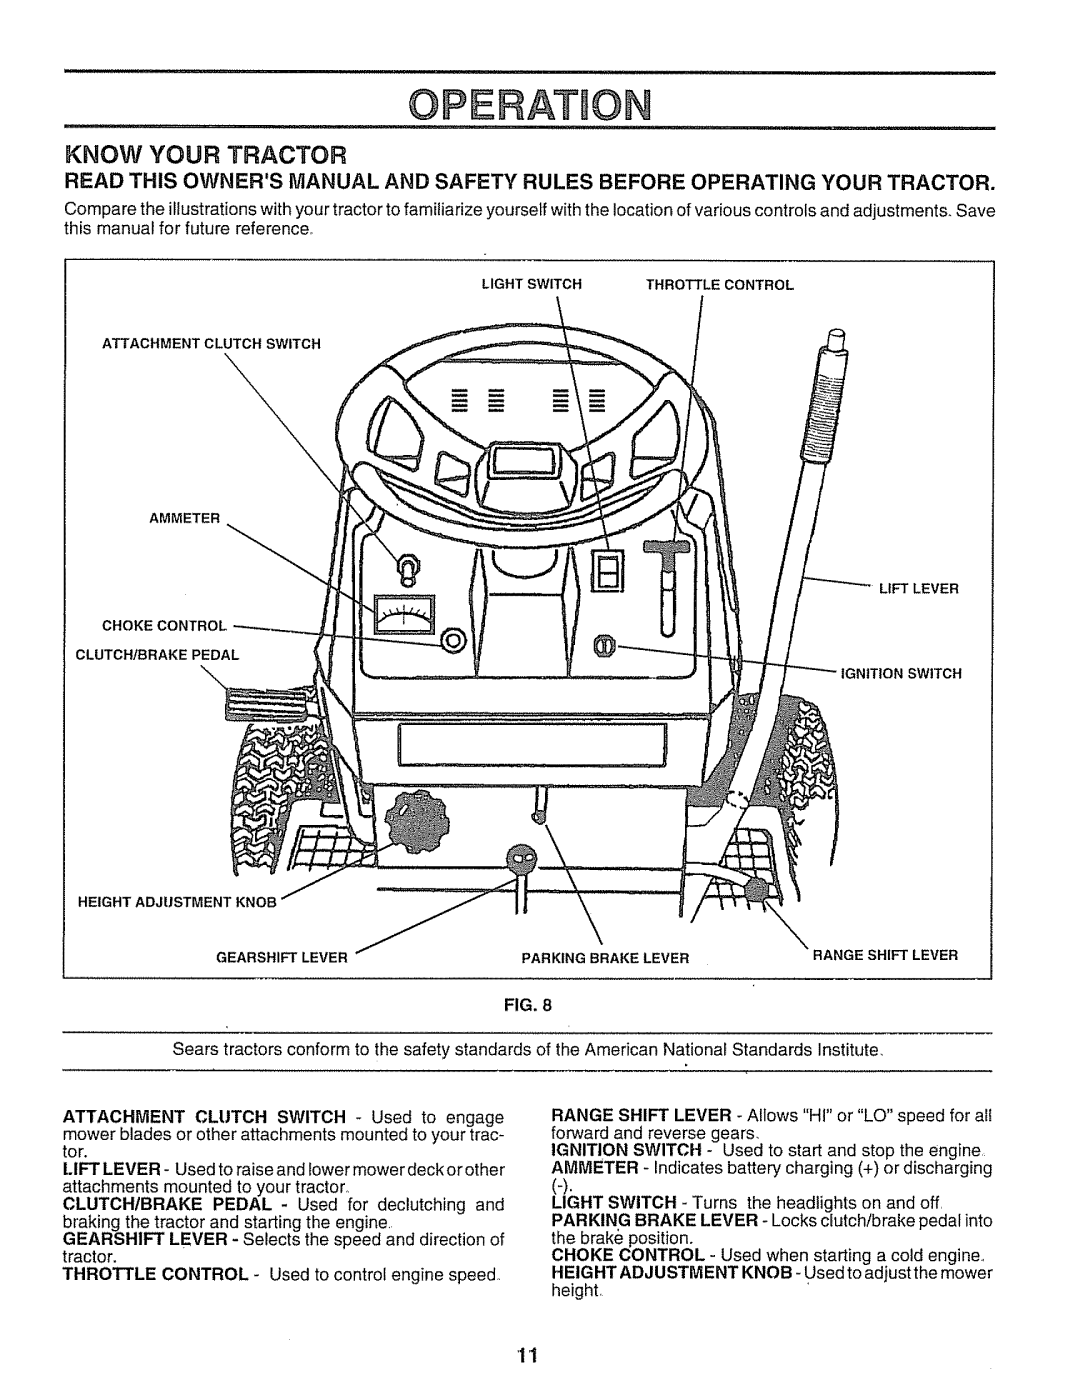 Sears 917.25597 owner manual Operation, Know Your Tractor 